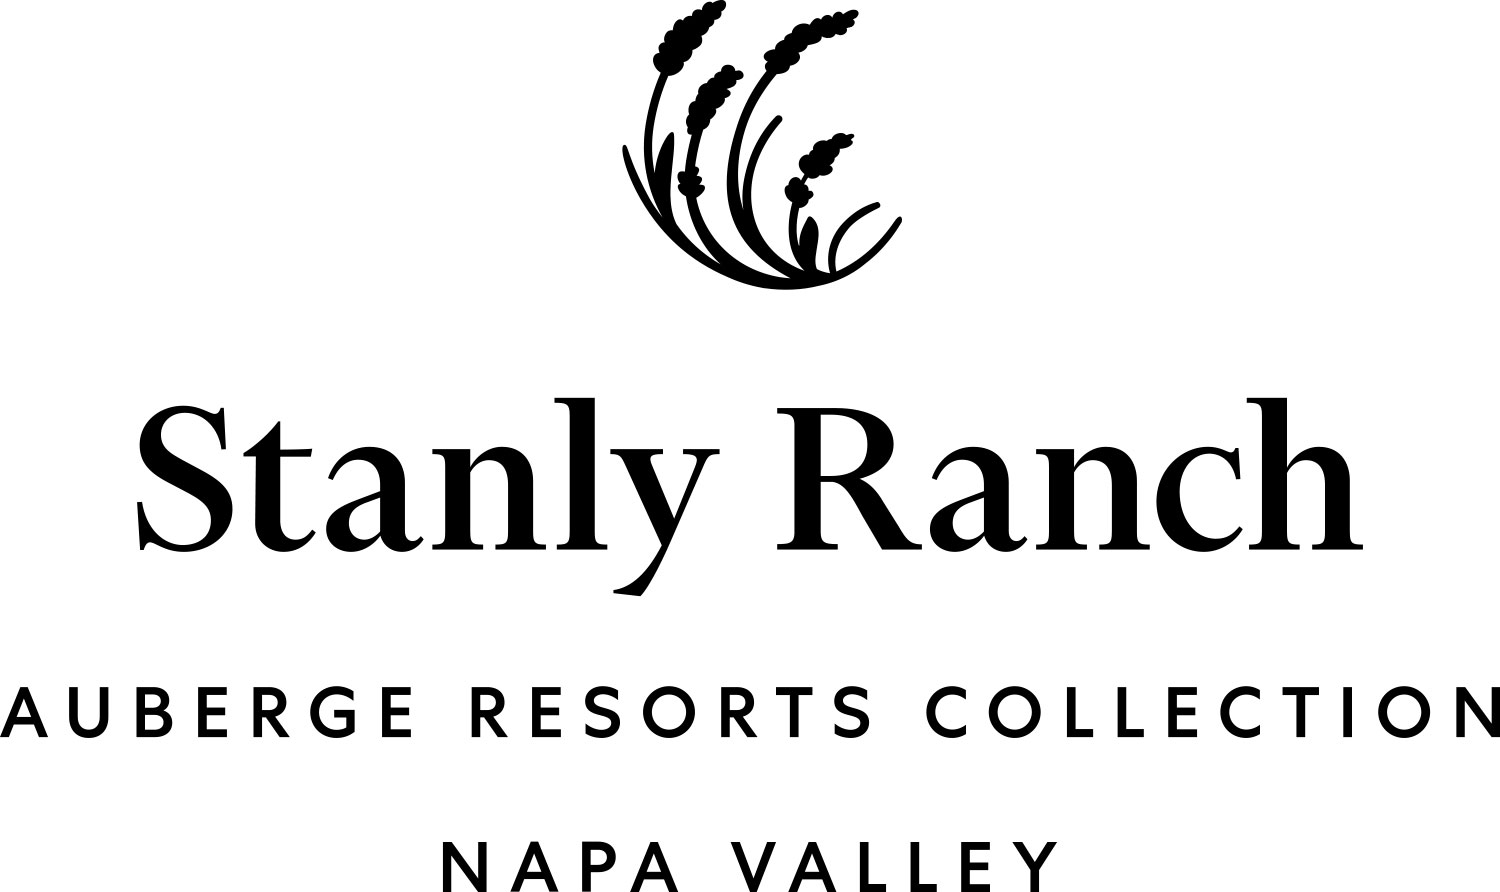 Stanly Ranch